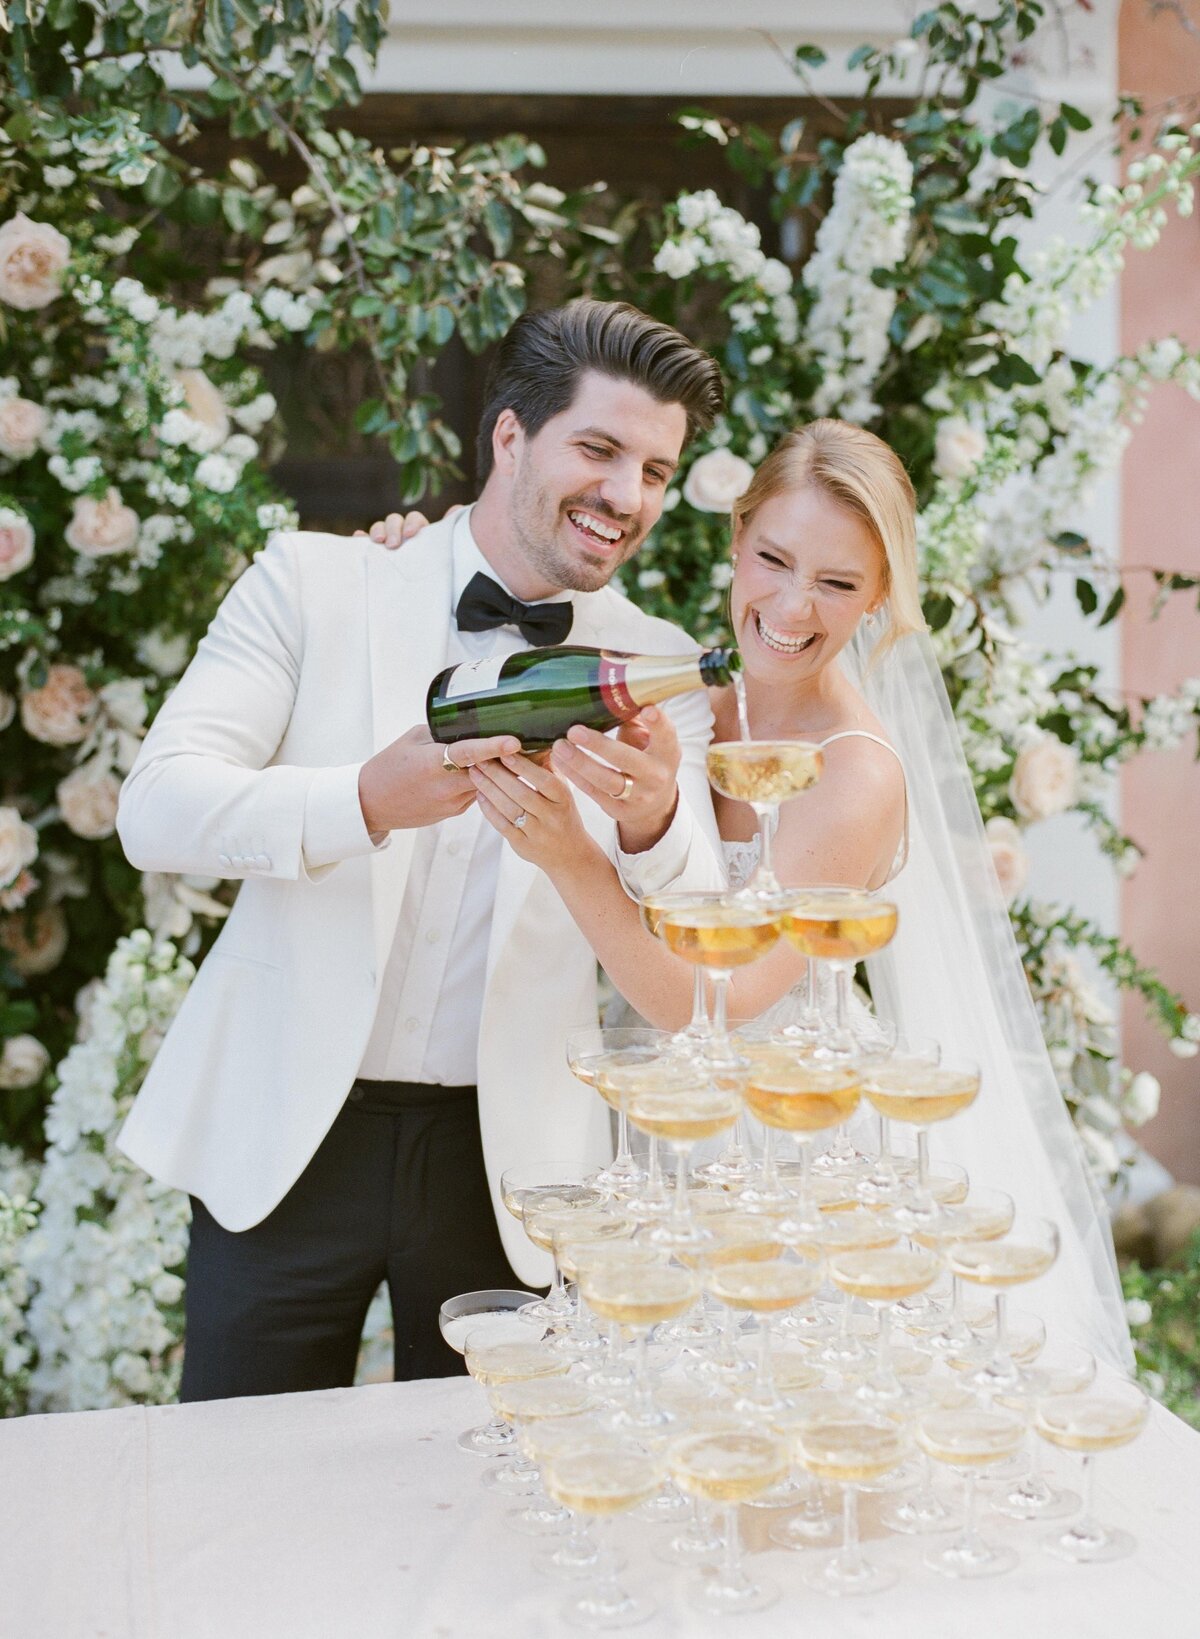 happy bride + groom + champagne tower